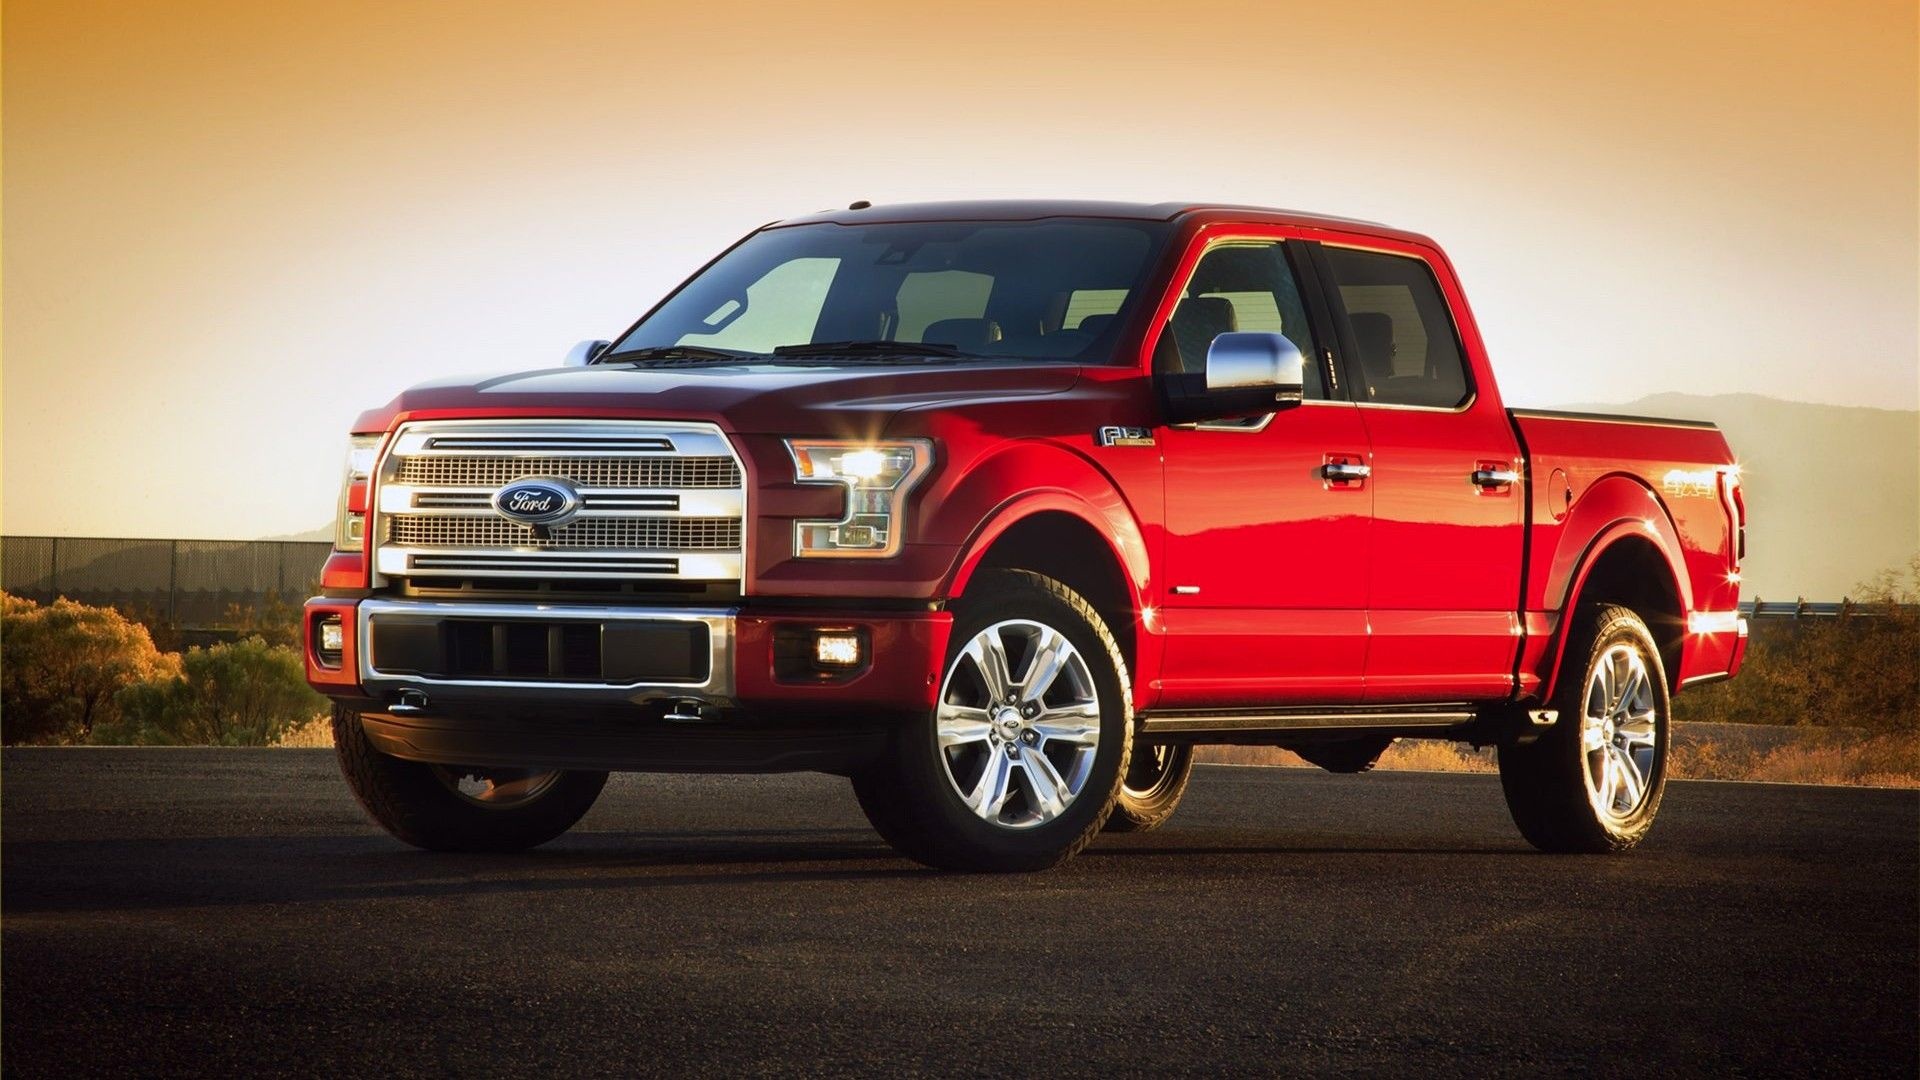 Ford Pickup: The F-150 is the most popular model in the F-Series lineup. 1920x1080 Full HD Wallpaper.